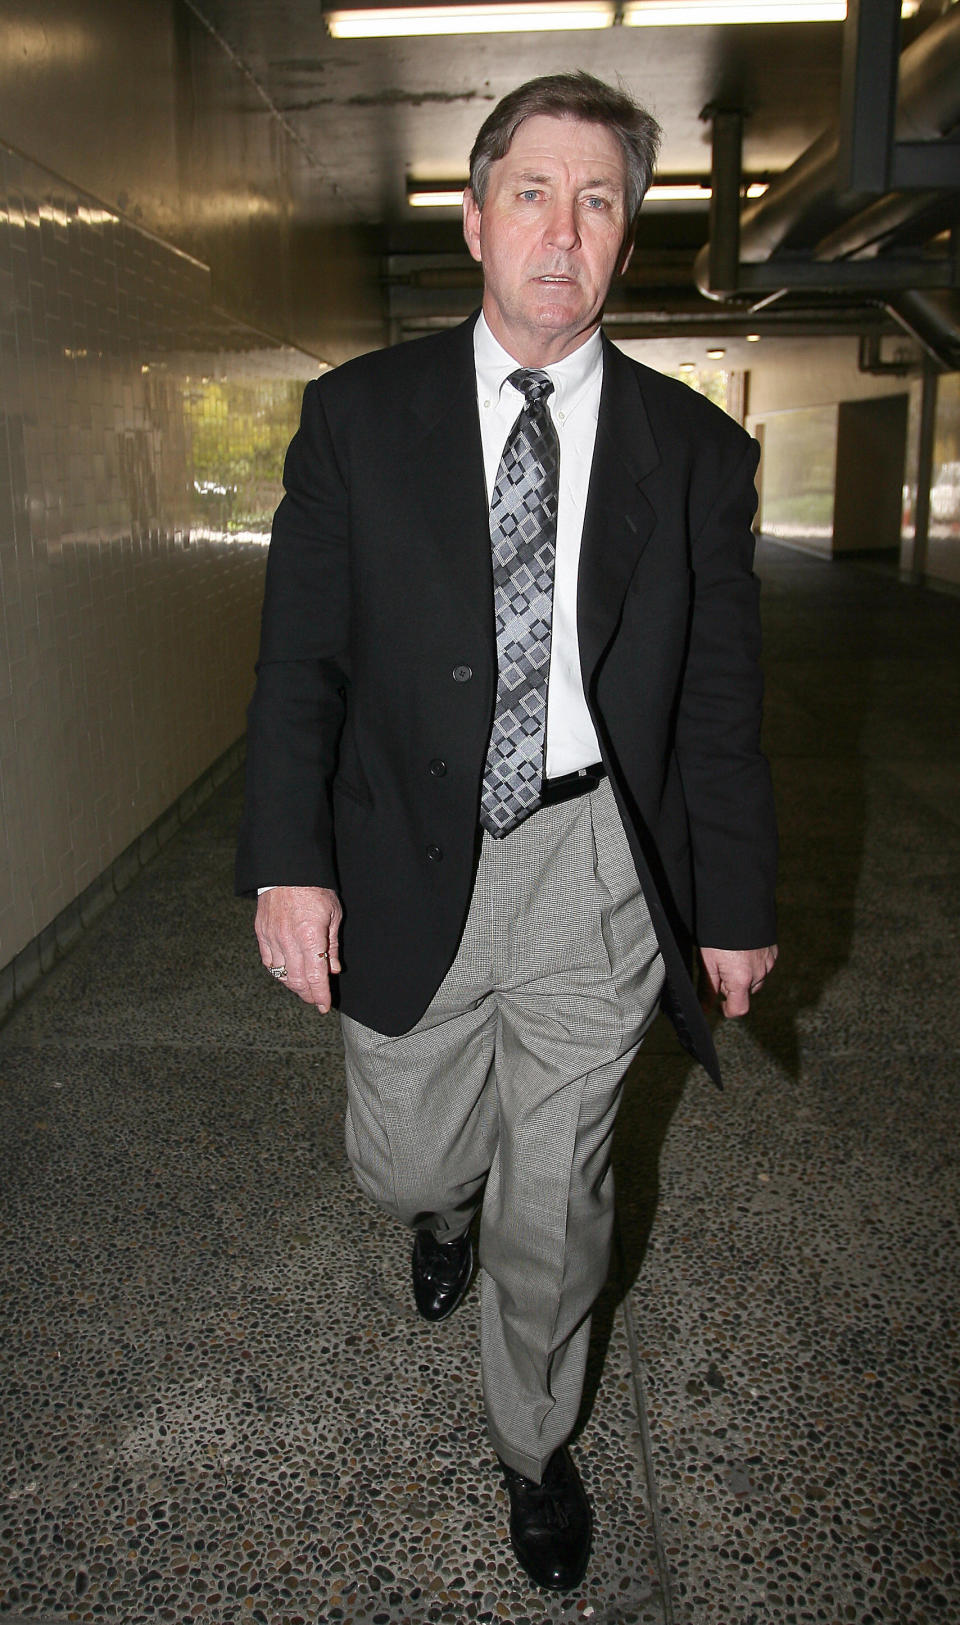 Britney Spears' father, Jamie Spears leaves the Los Angeles County Superior courthouse on March 10, 2008. The divorce between Spears and Kevin Federline and their battle for custody of their children has already cost the singer about a million dollars, Spear's lawyer Stacy Phillips said on March 10, 2008, and called on the presiding judge in the case to limit the allowance Spears has had to give Federline to pay his lawyers to 175,000 dollars, warning she was not an 